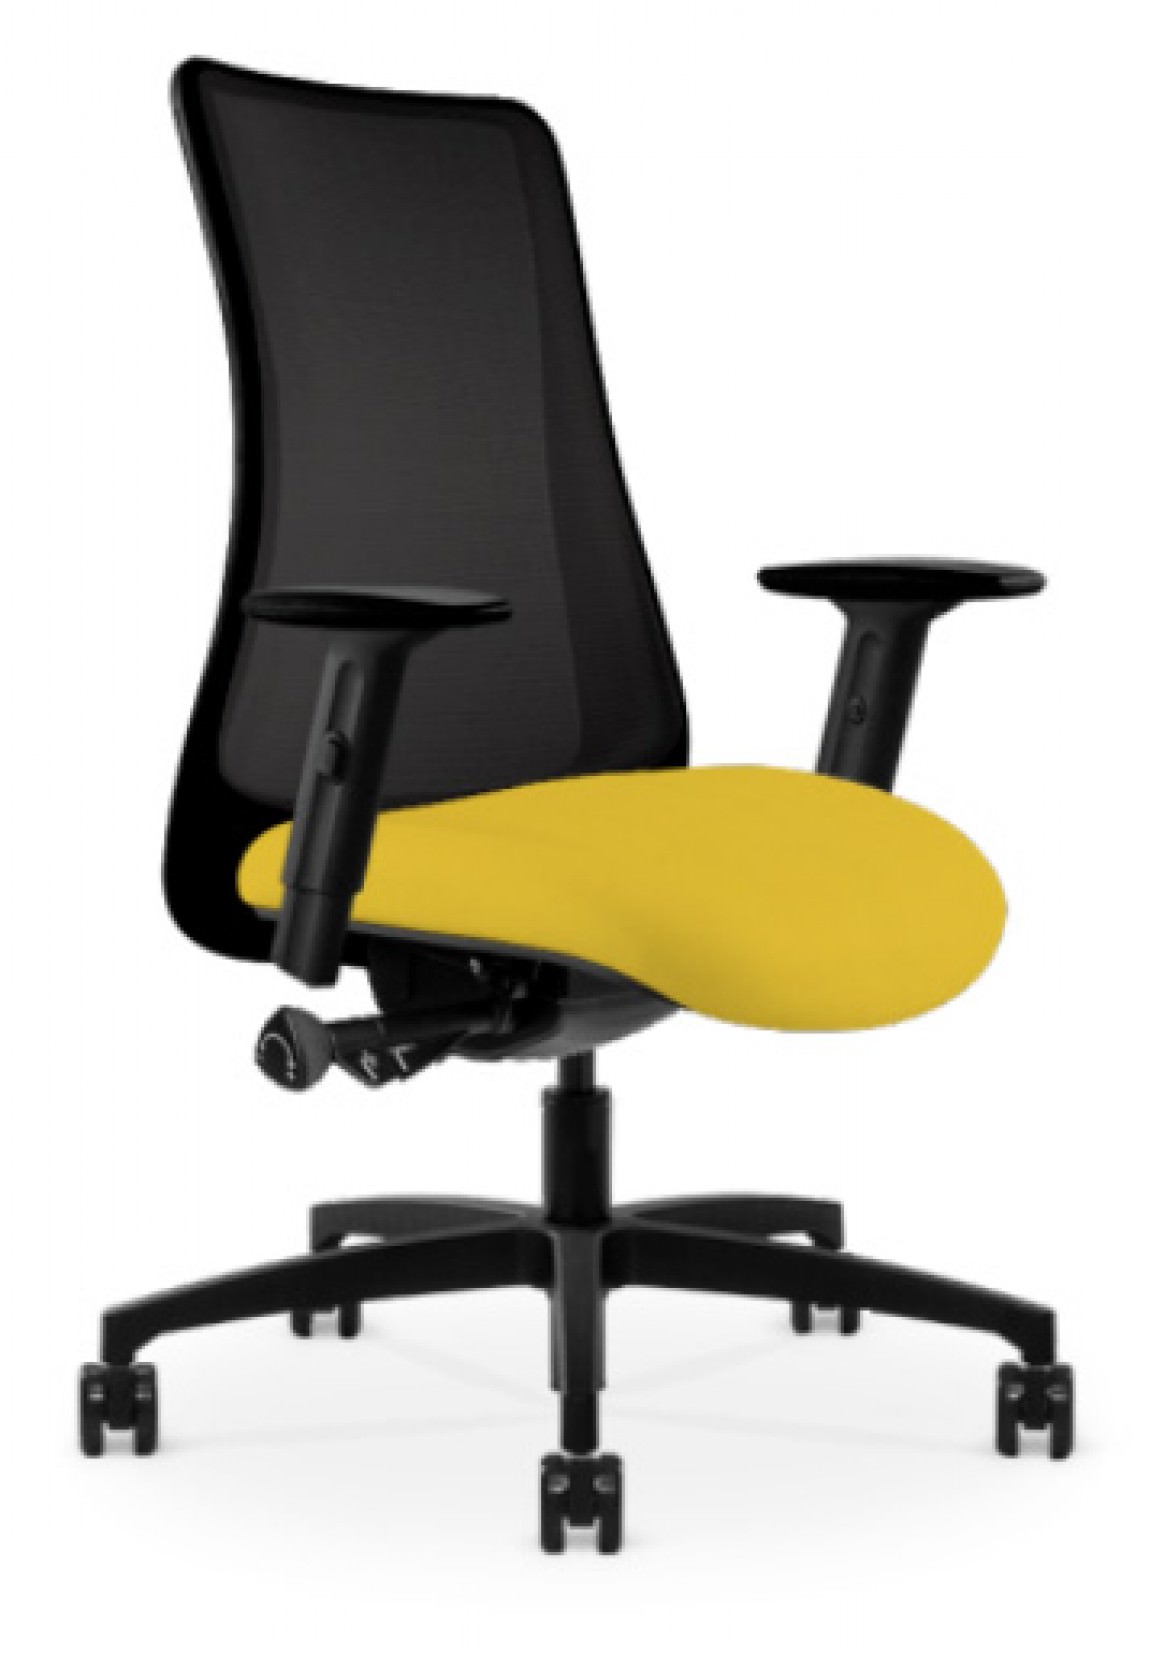 Black Copper Mesh Antimicrobial Office Chair w/ Yellow Seat